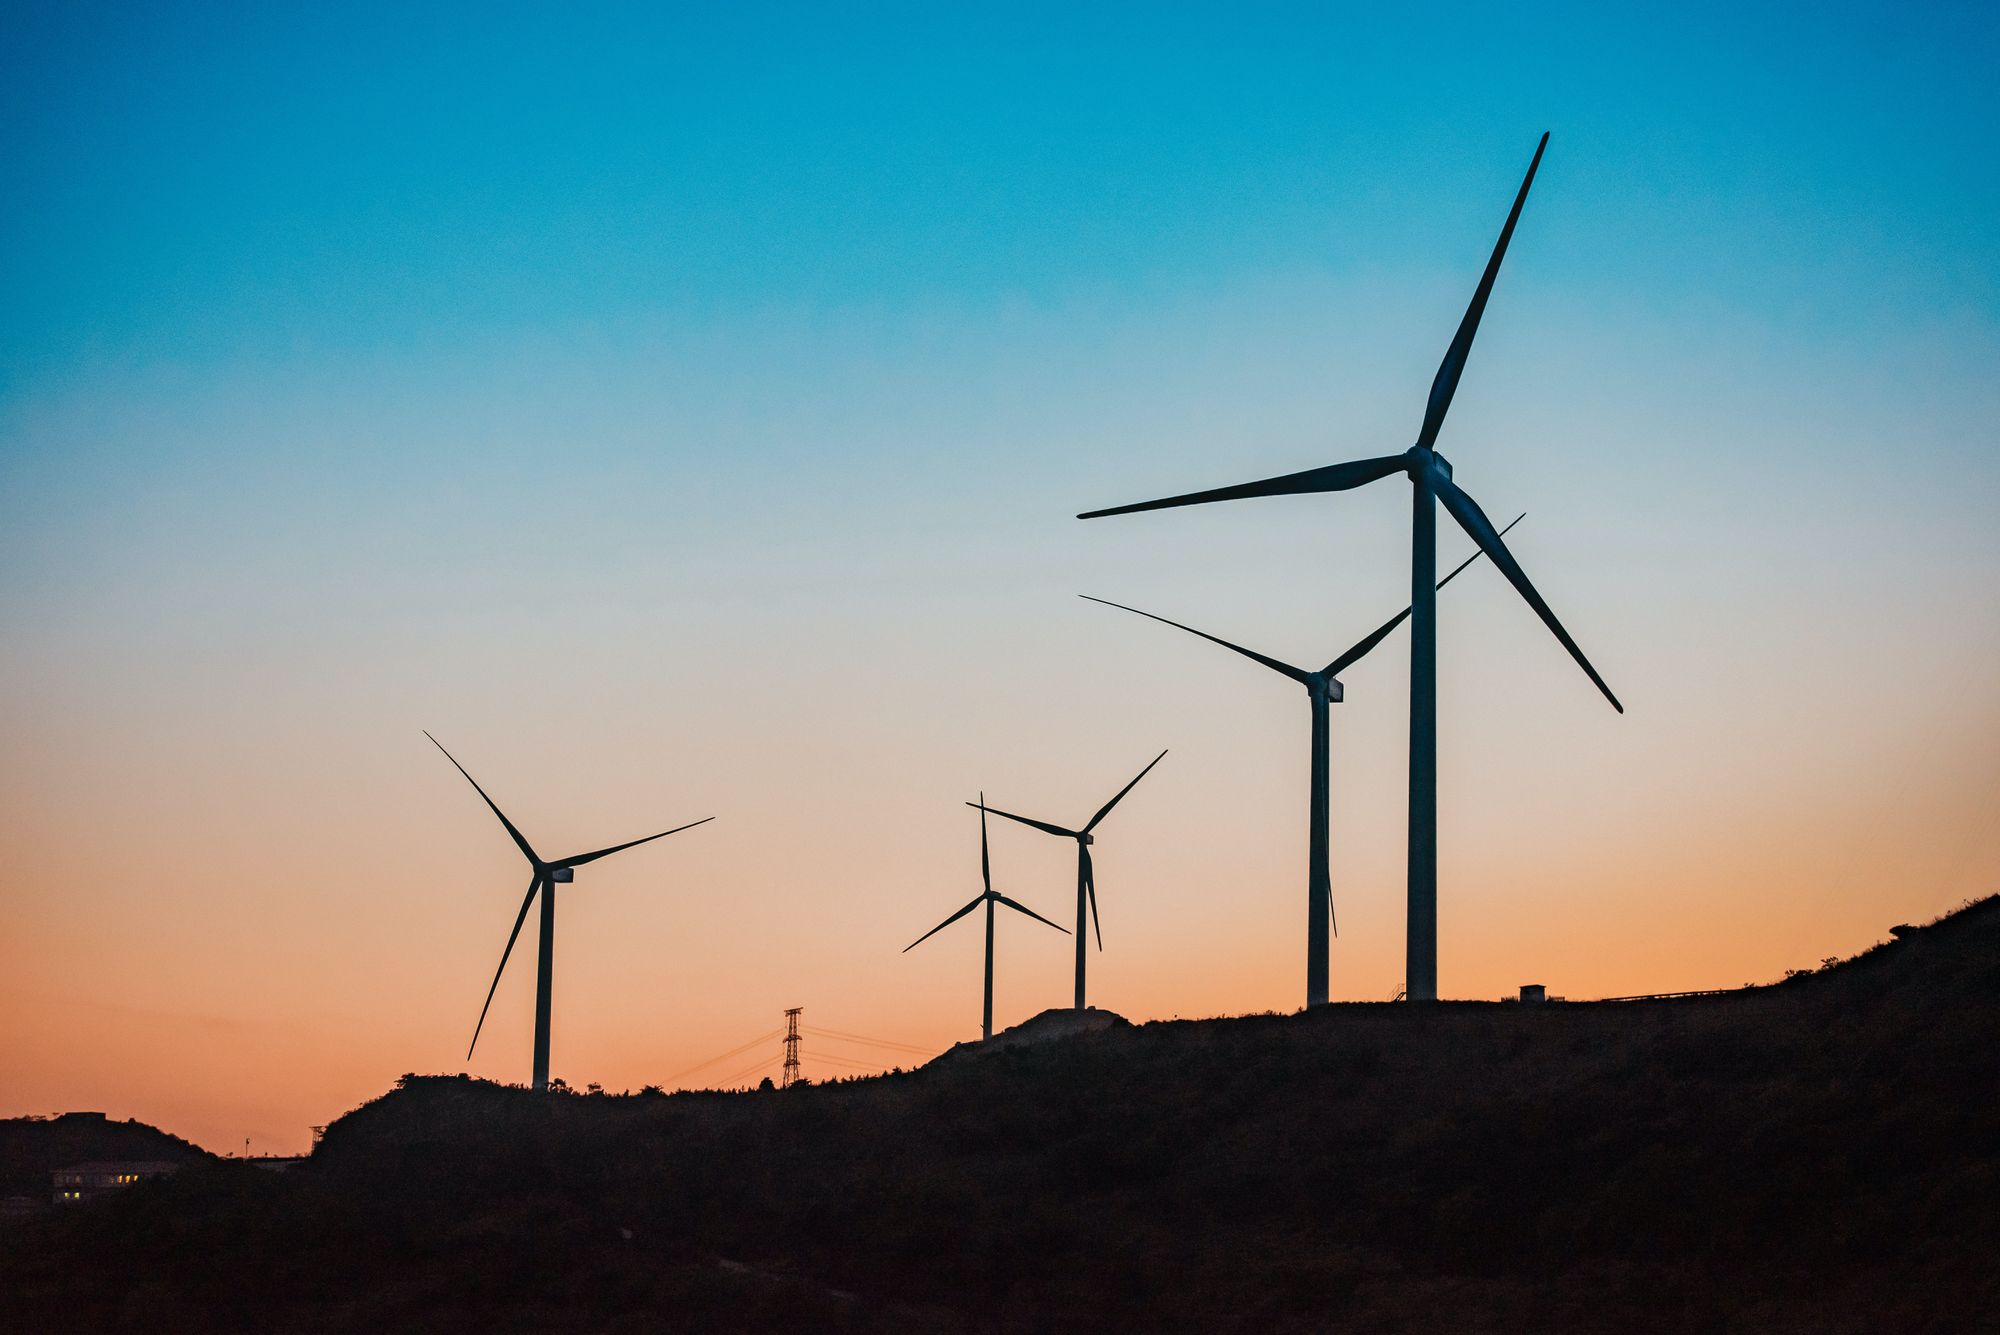 Are owners and operators accurately accounting for energy losses in a wind farm?